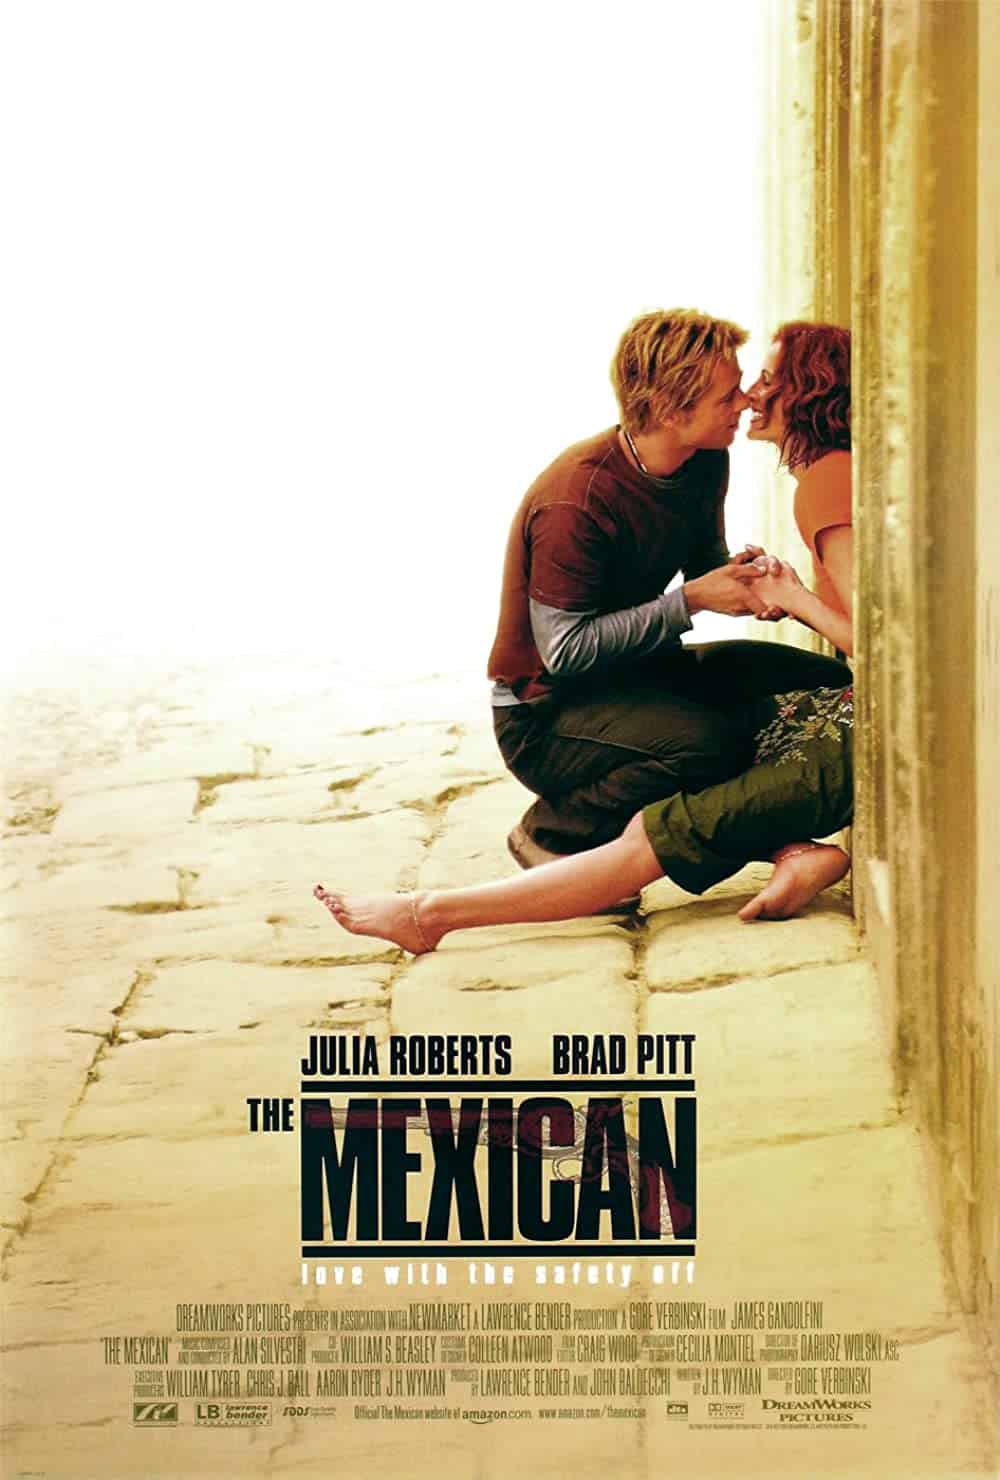 The Mexican (2001) Best Julia Roberts Movies (Ranked)